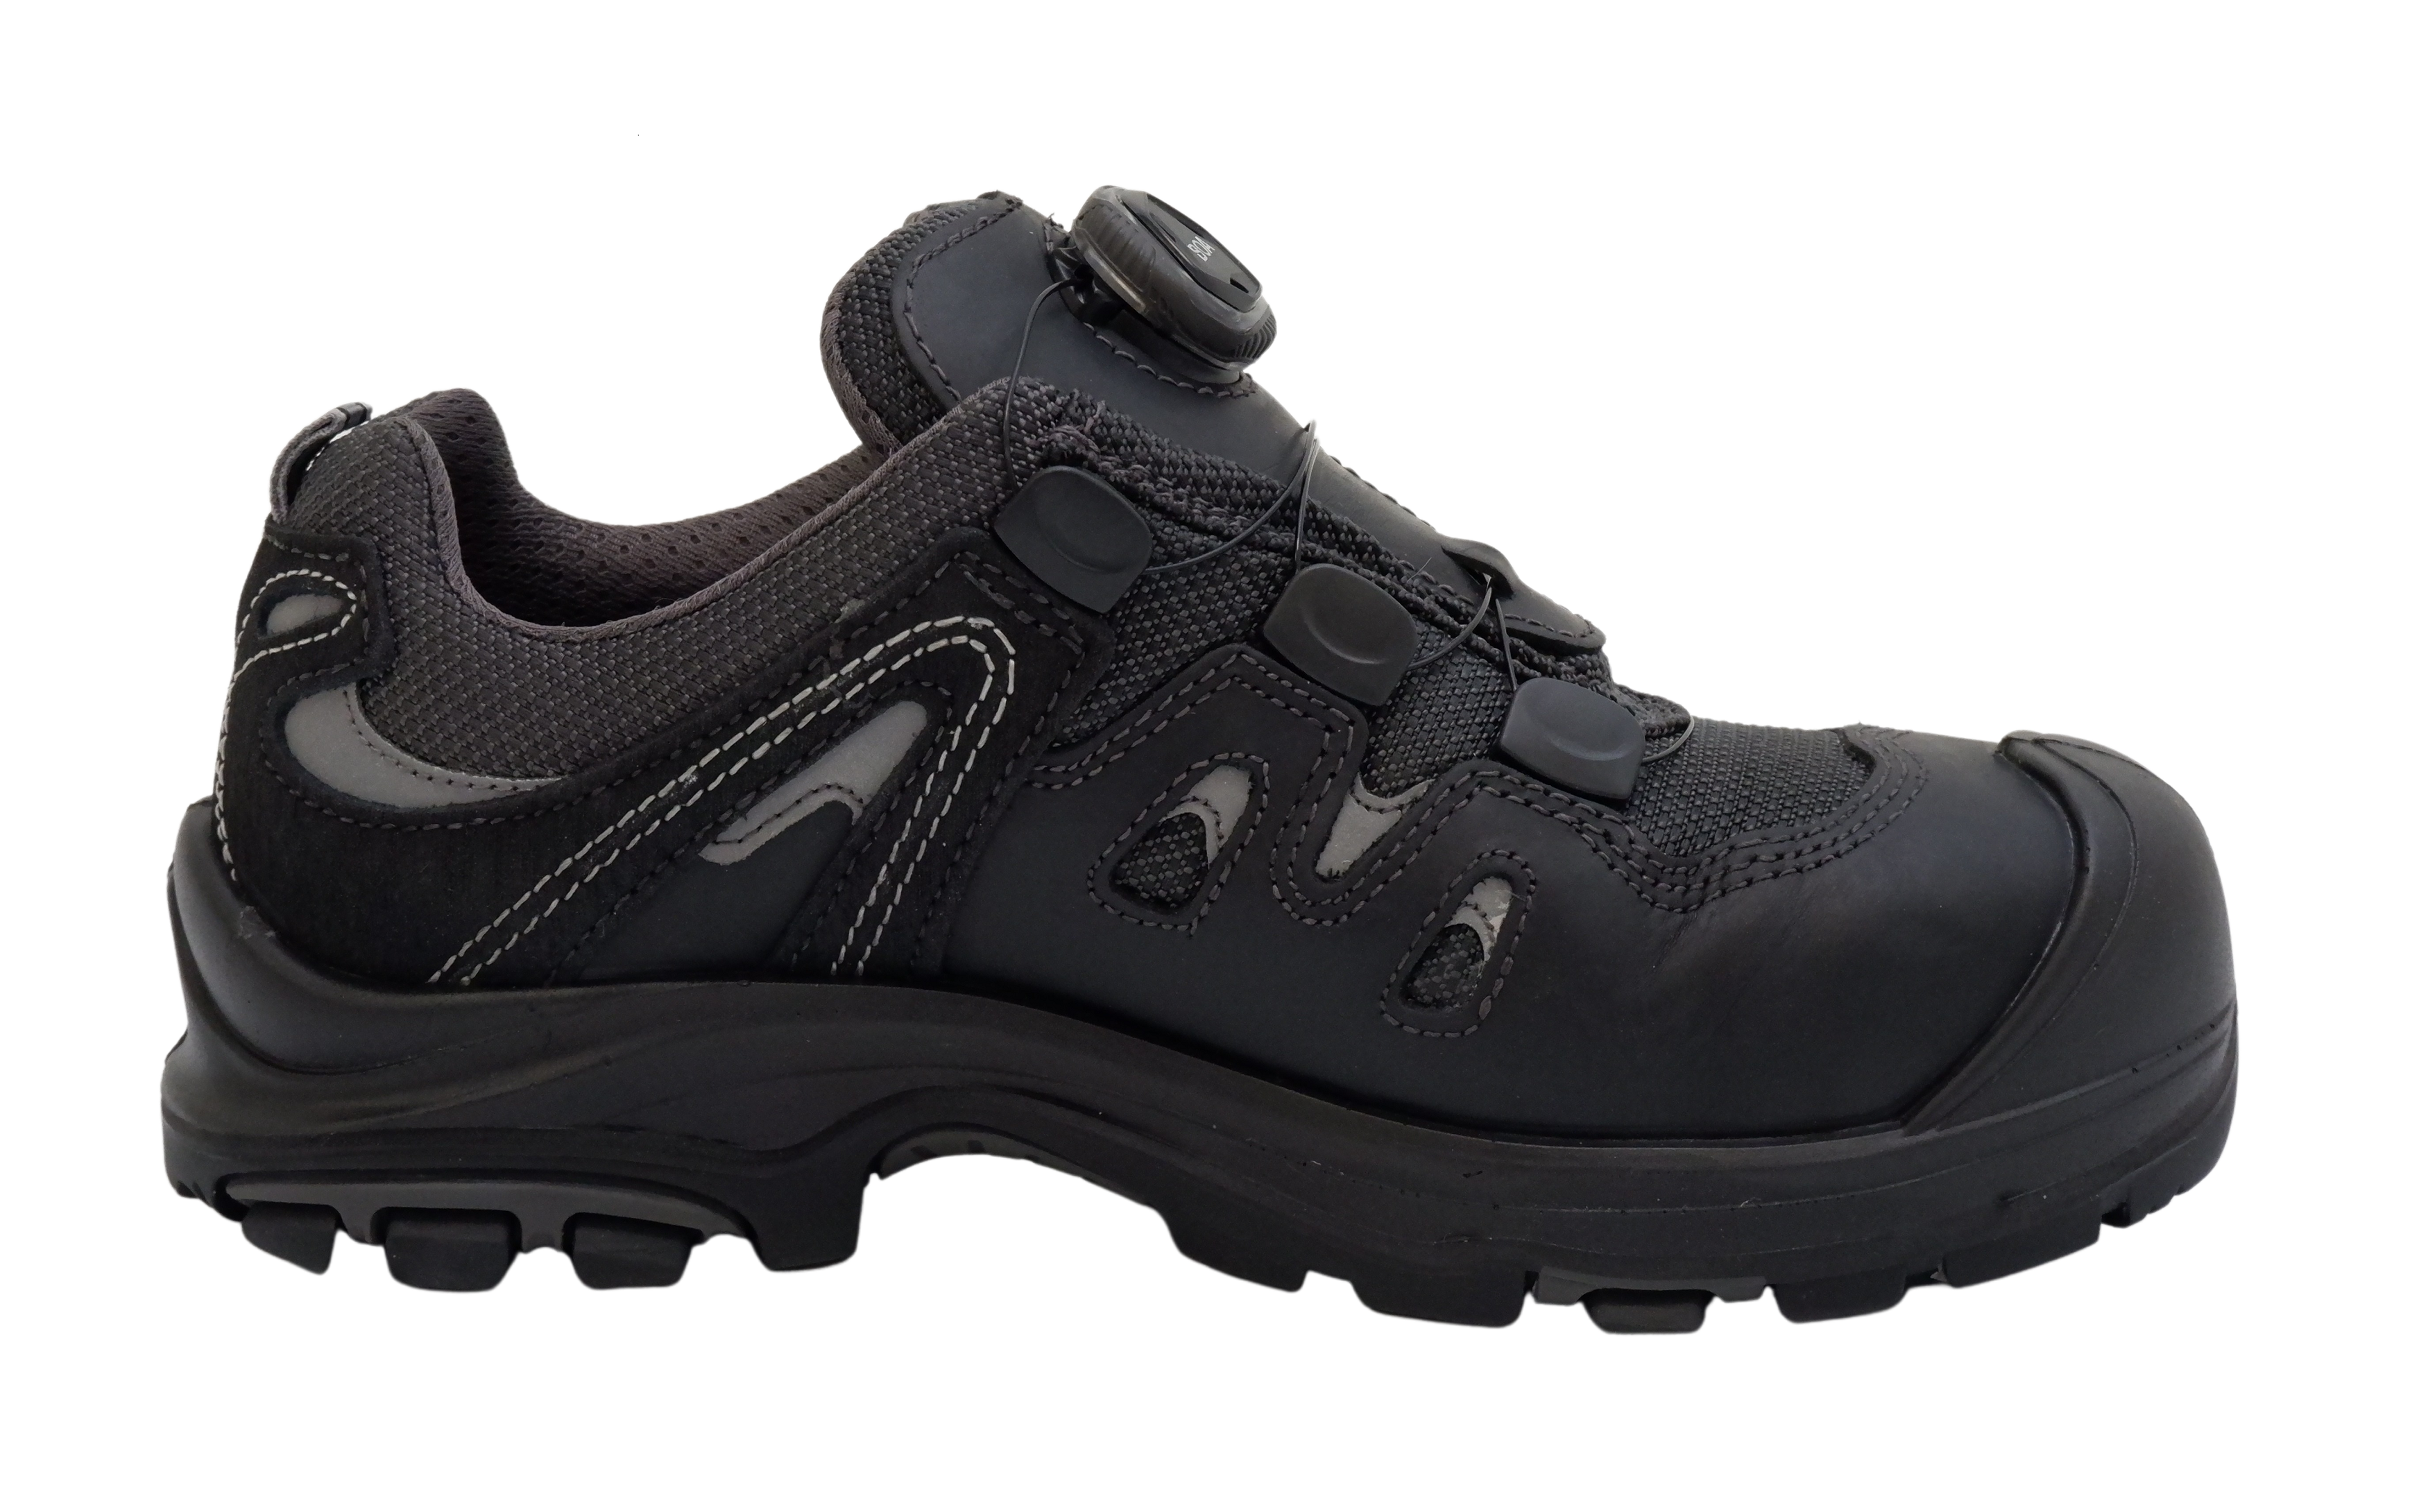 Grisport Men's Safety Work Shoes BOA Lite Breathable Upper Vibram® Sole with Steel Toe Cap Sizes 7-13